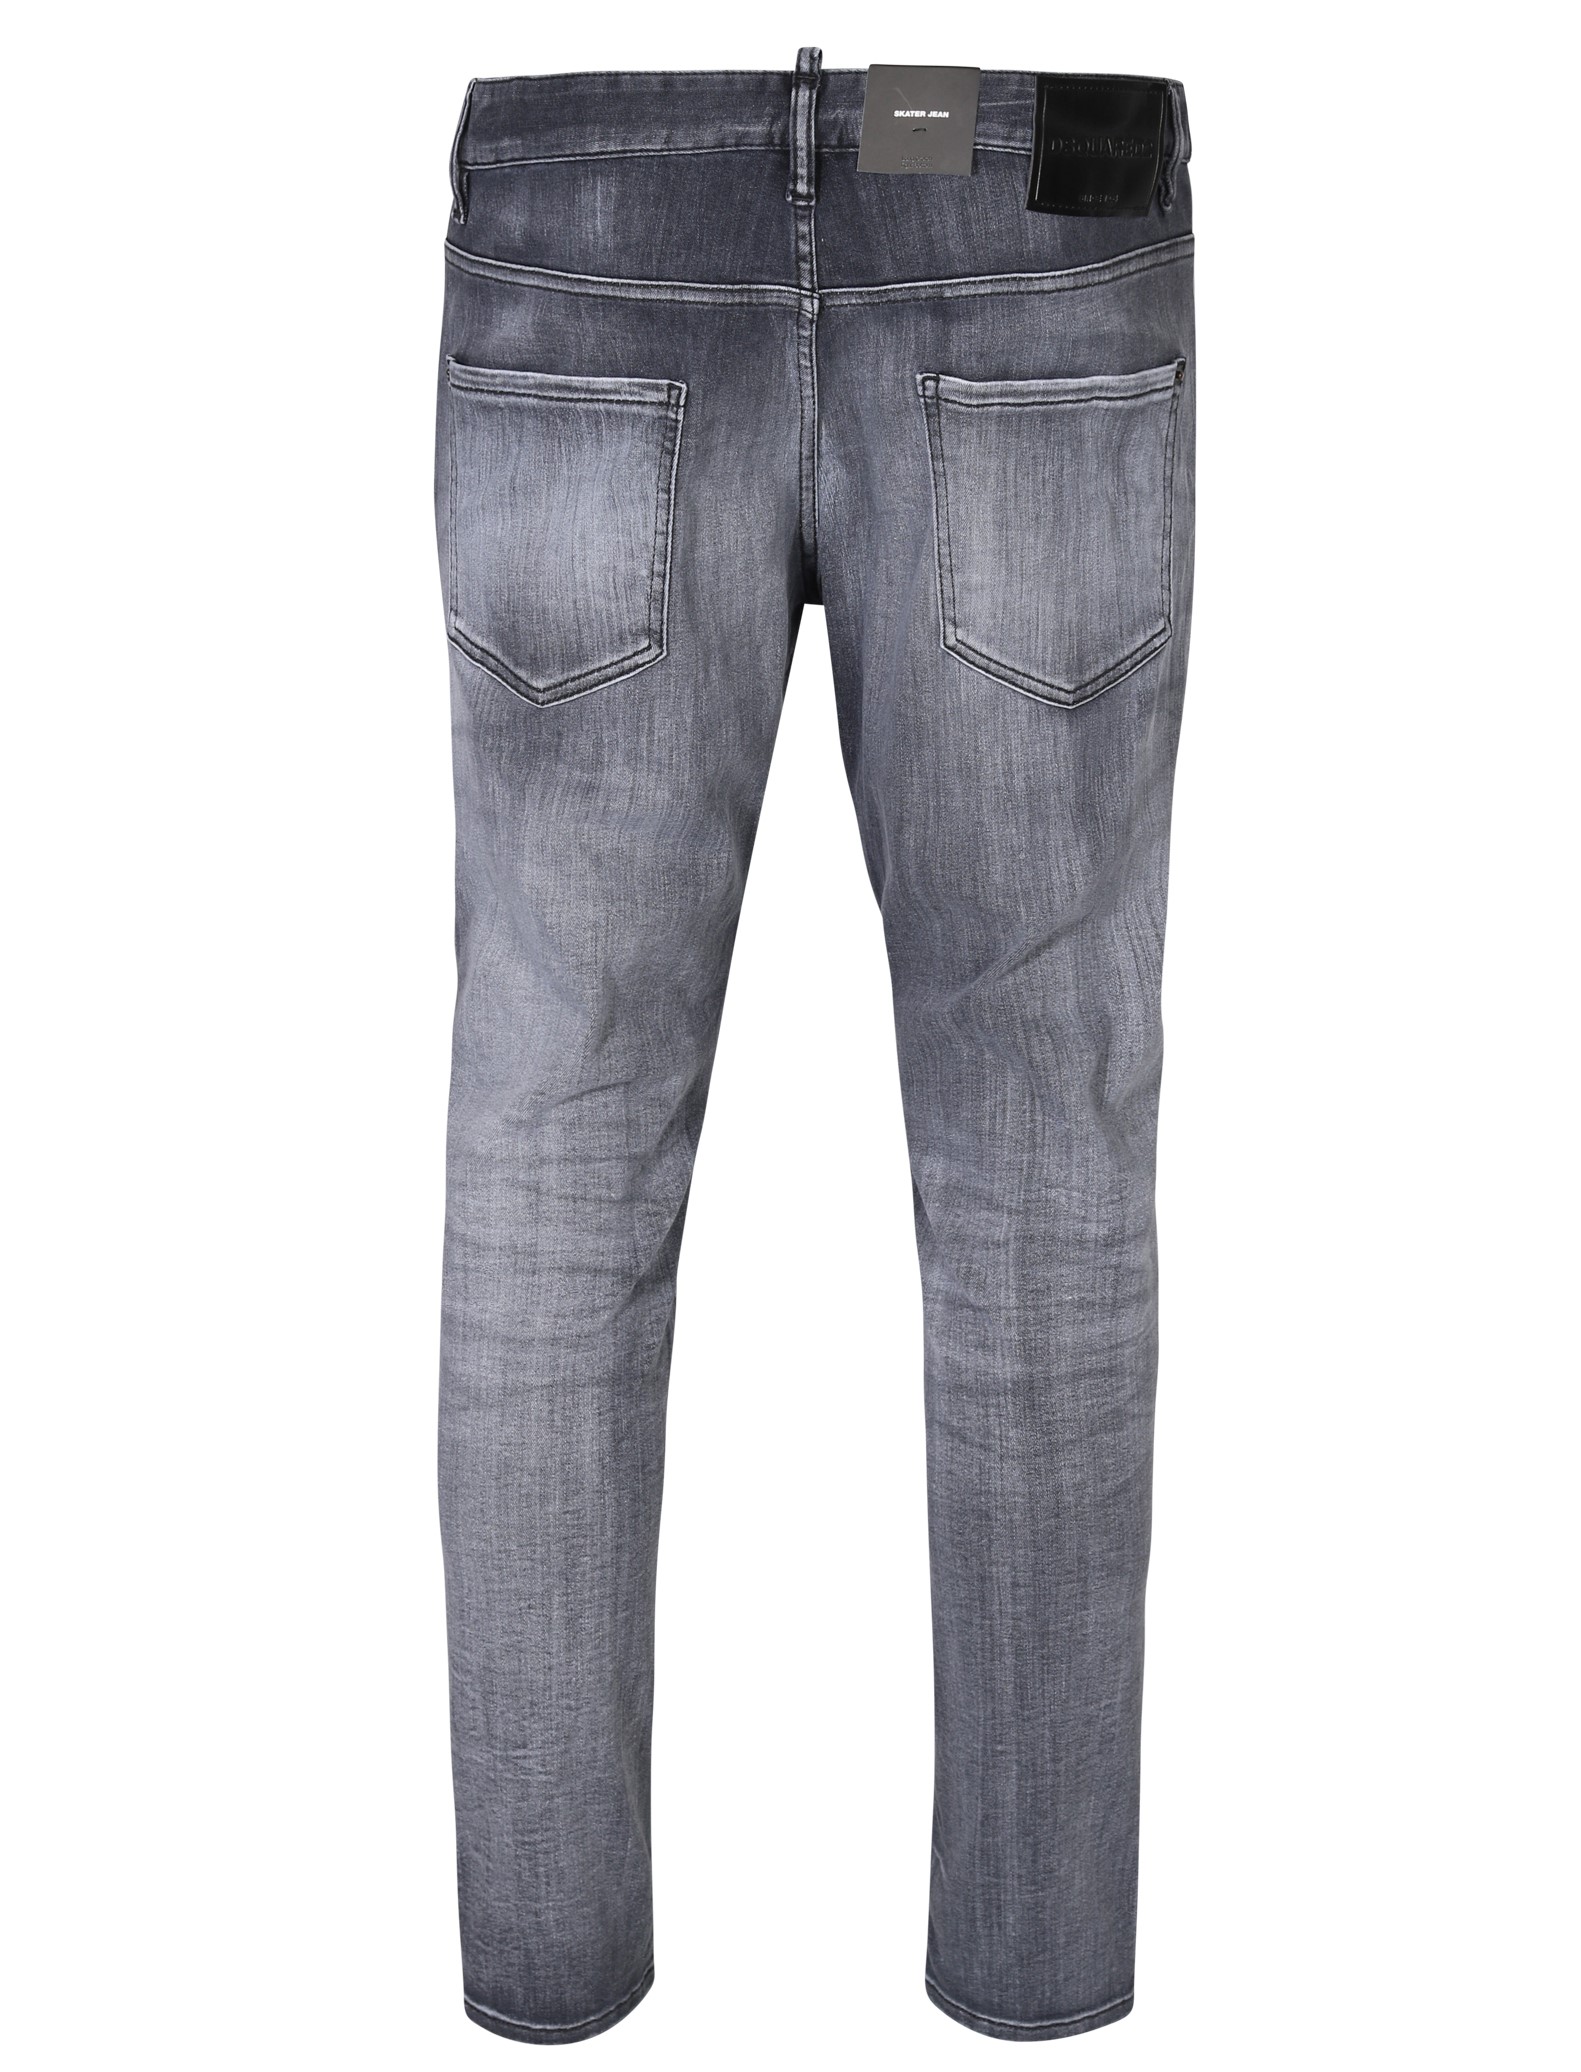 DSQUARED2 Skater Jeans in Washed Grey 46